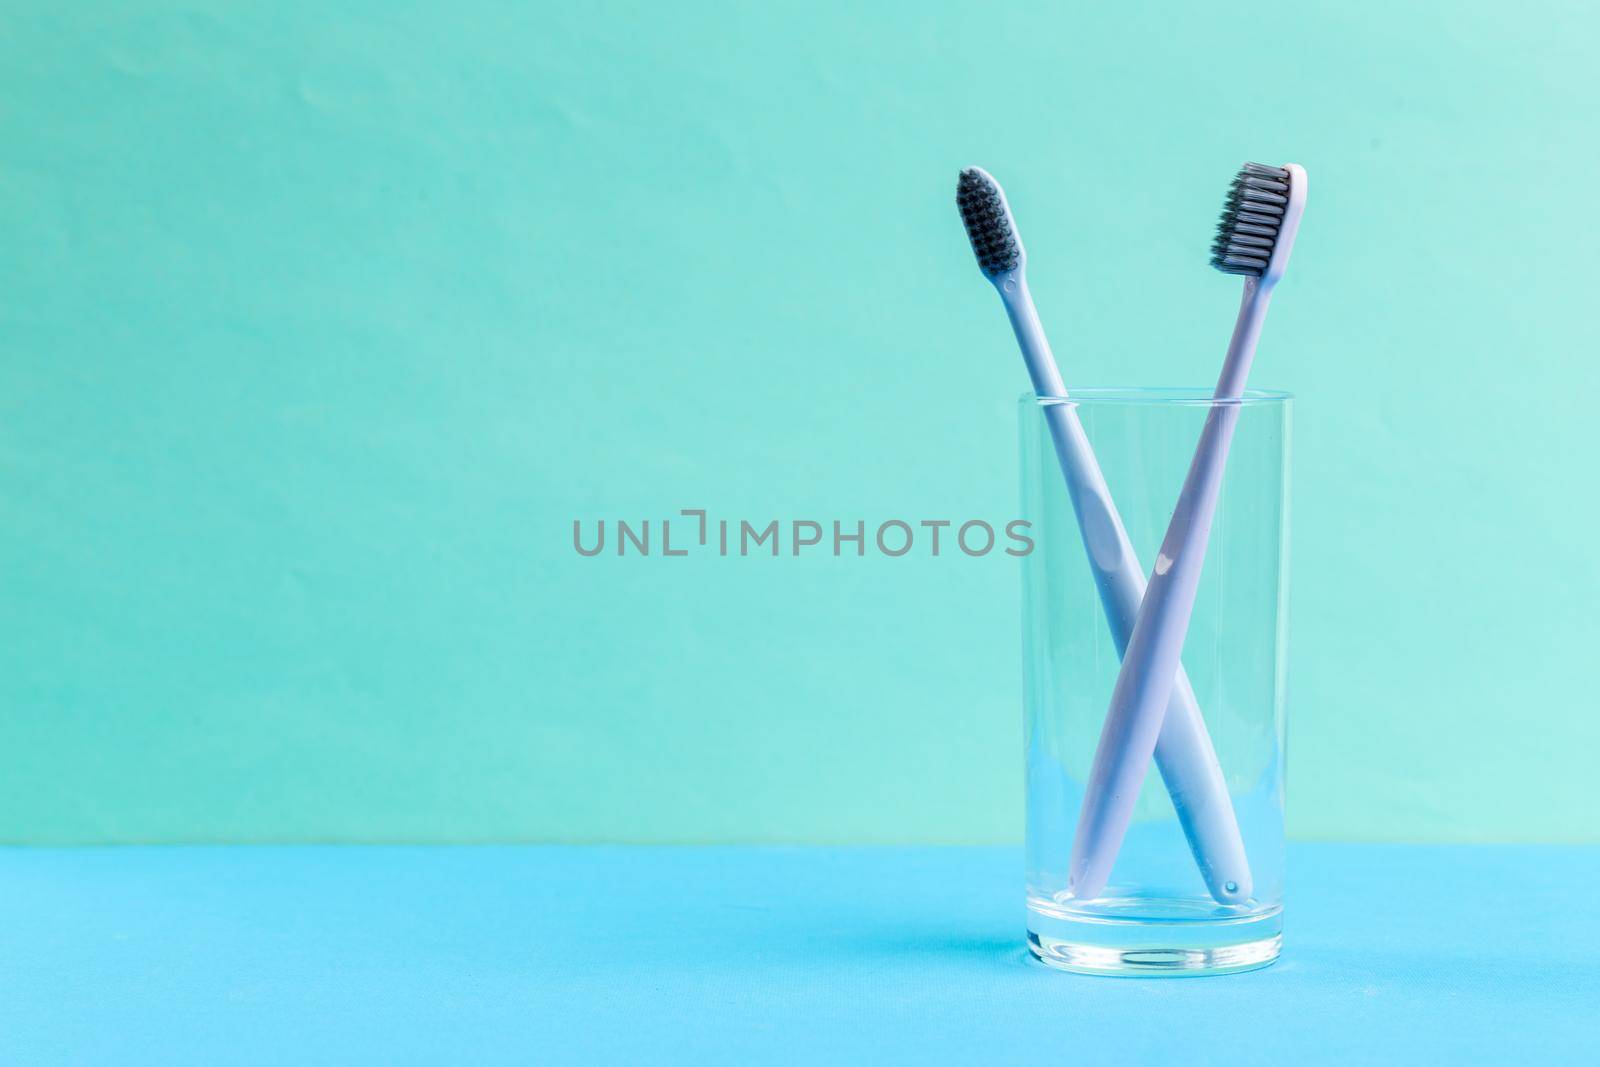 Toothbrushes in glass. close up. creative photo. by Fabrikasimf